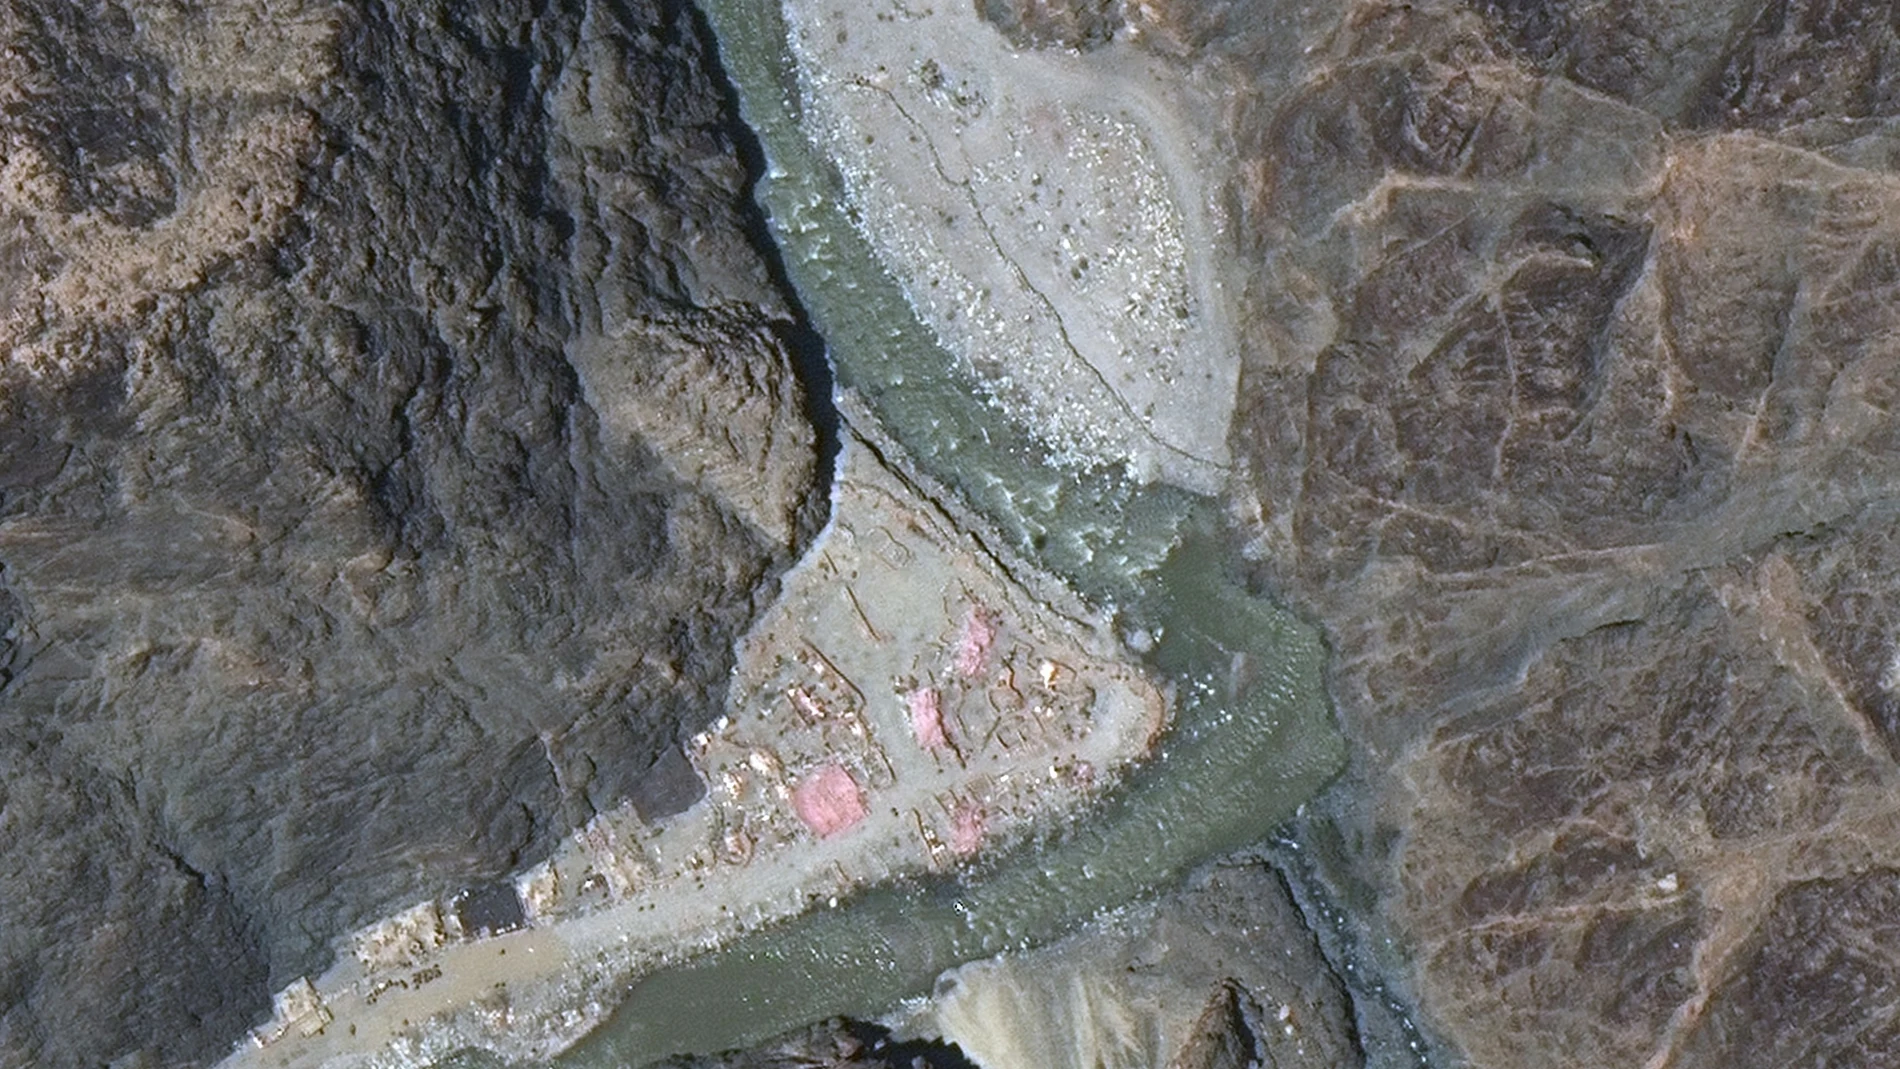 Maxar WorldView-3 satellite image shows close up view of the Line of Actual Control (LAC) border and patrol point 14 in the eastern Ladakh sector of Galwan Valley